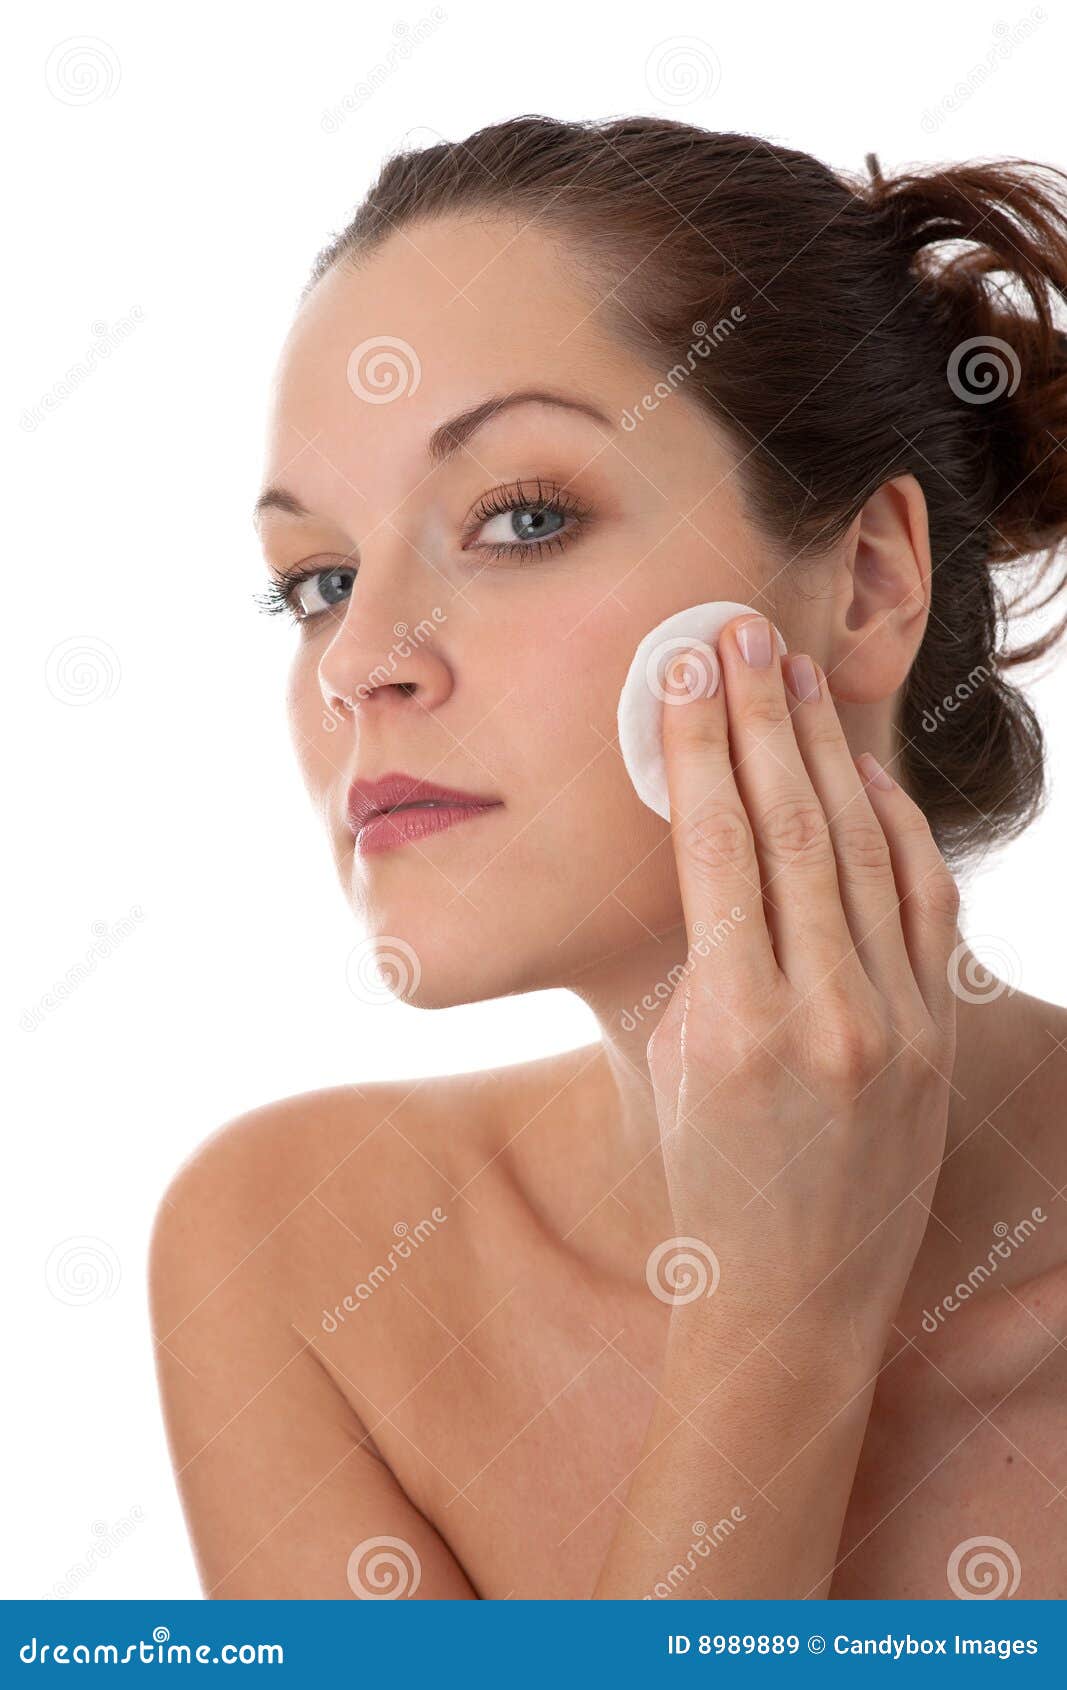 body care - young woman remove make-up